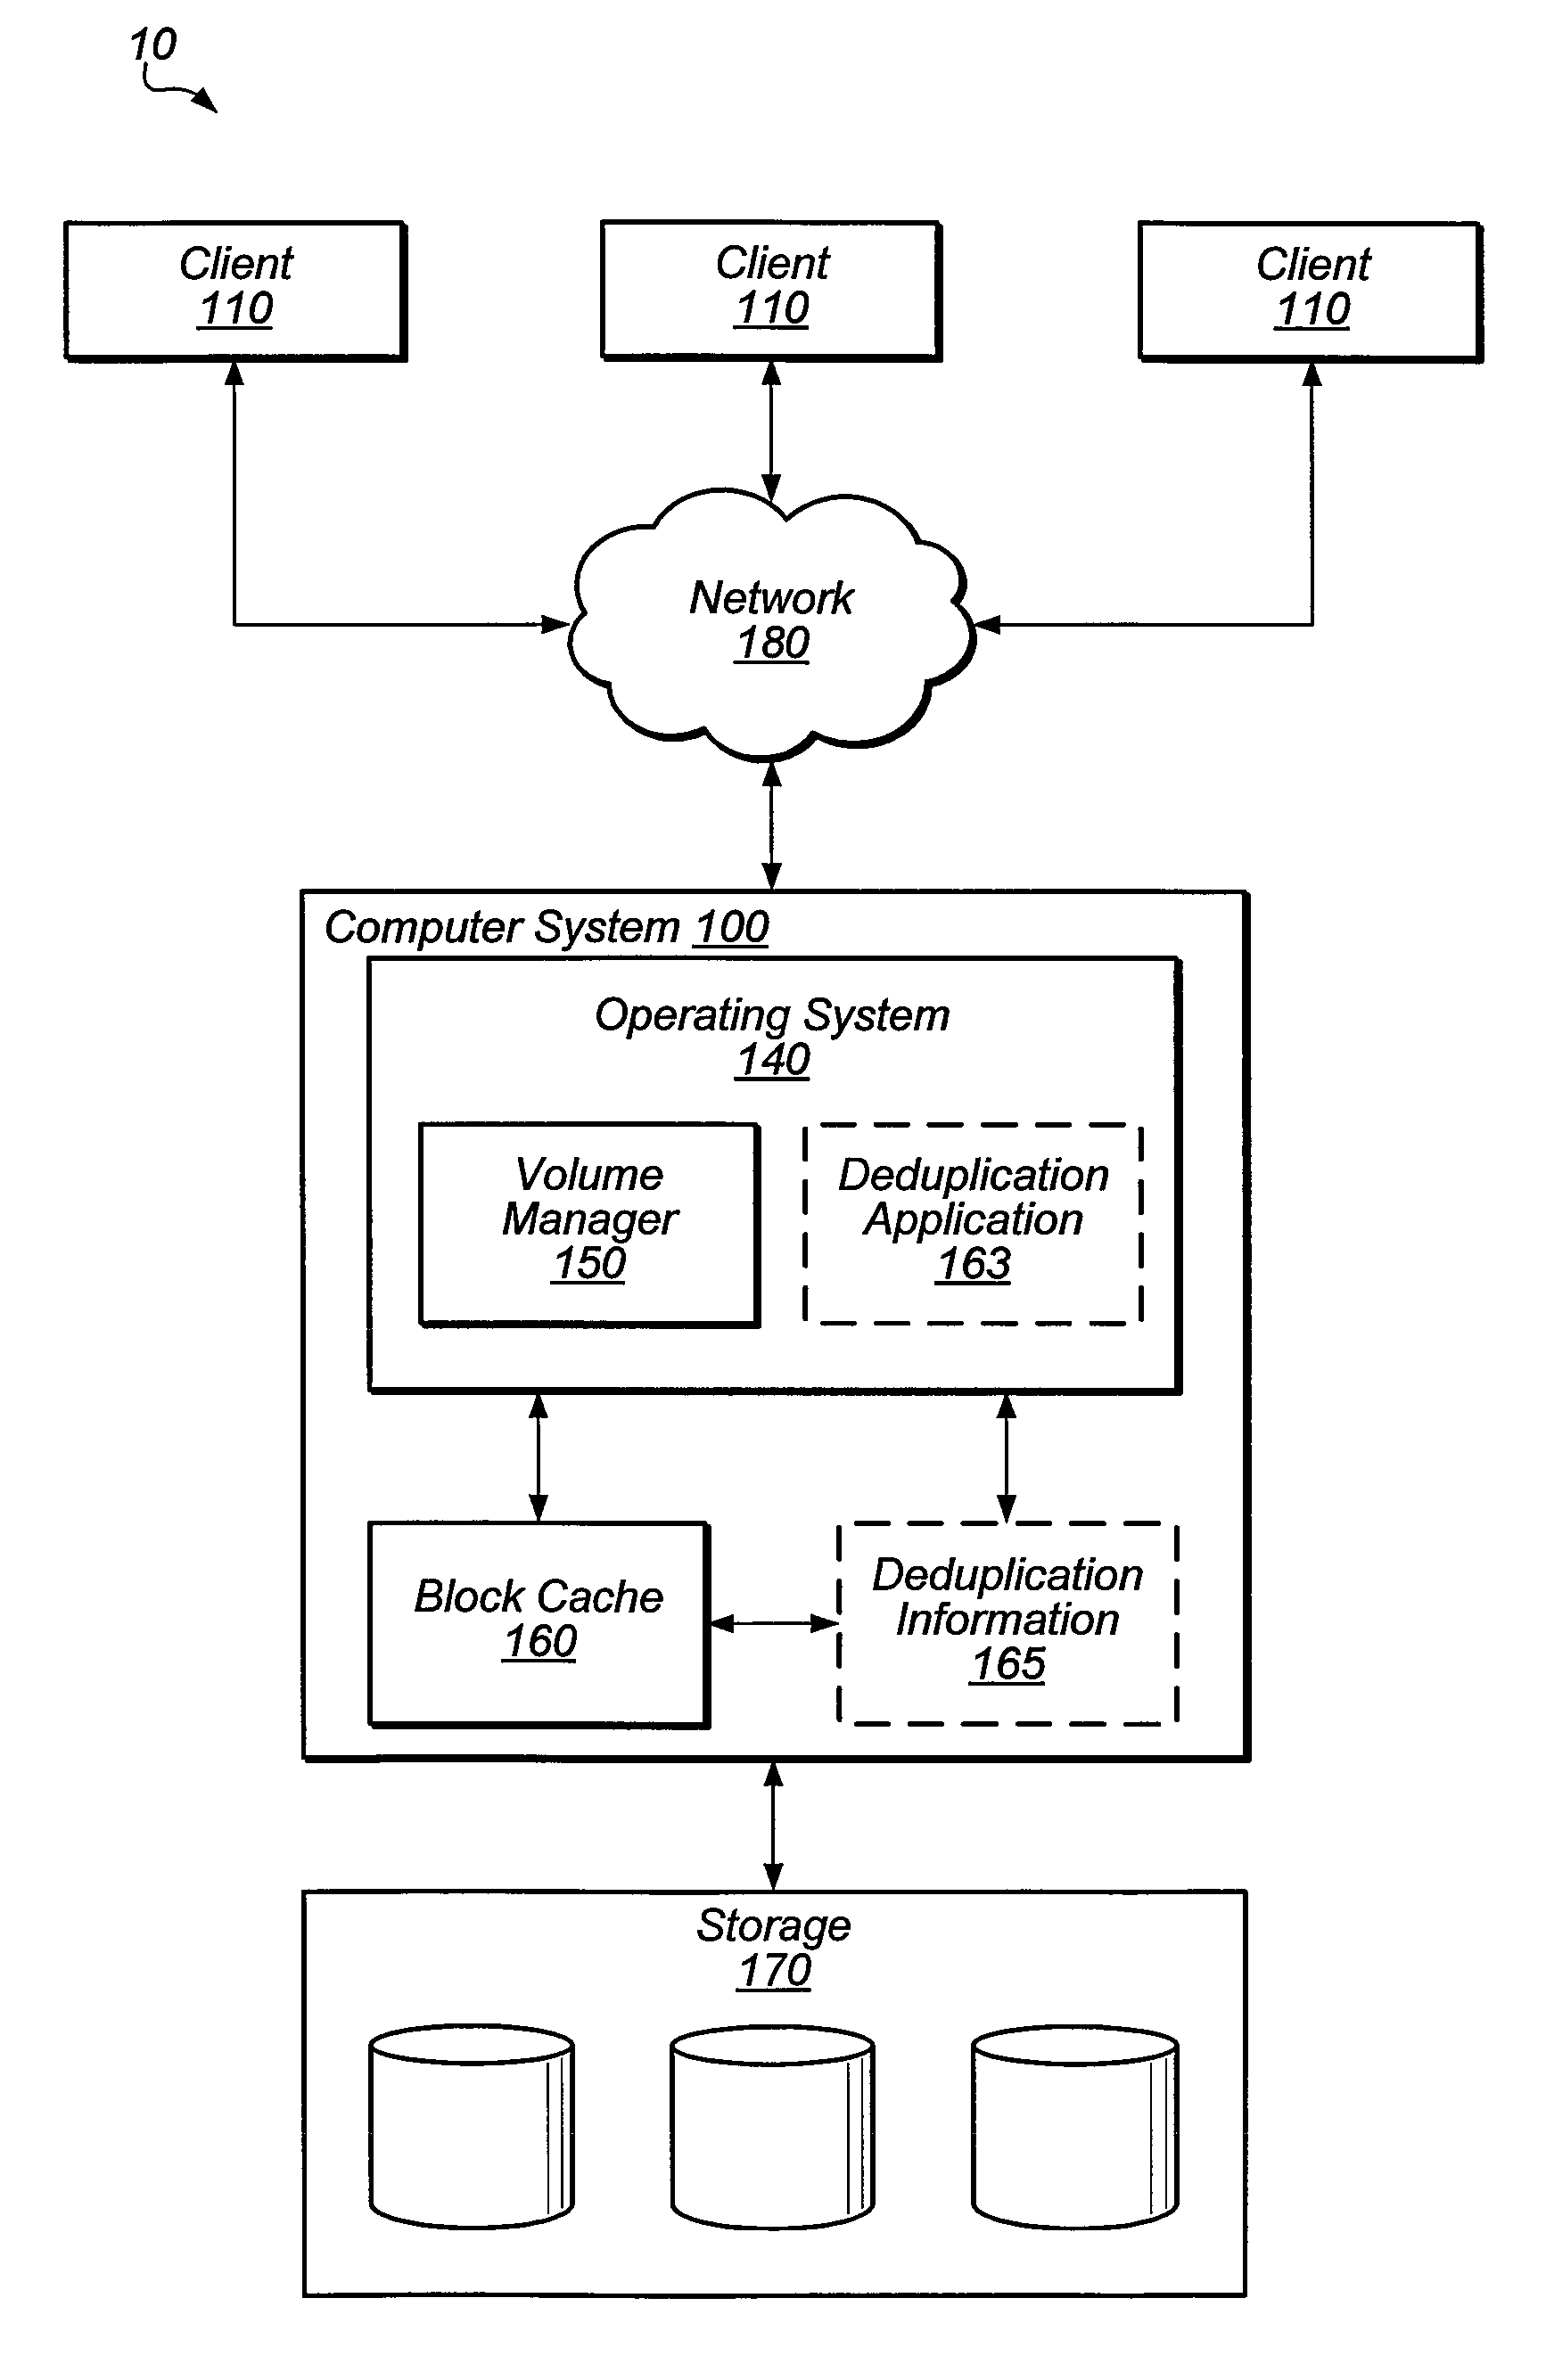 Cache management for file systems supporting shared blocks